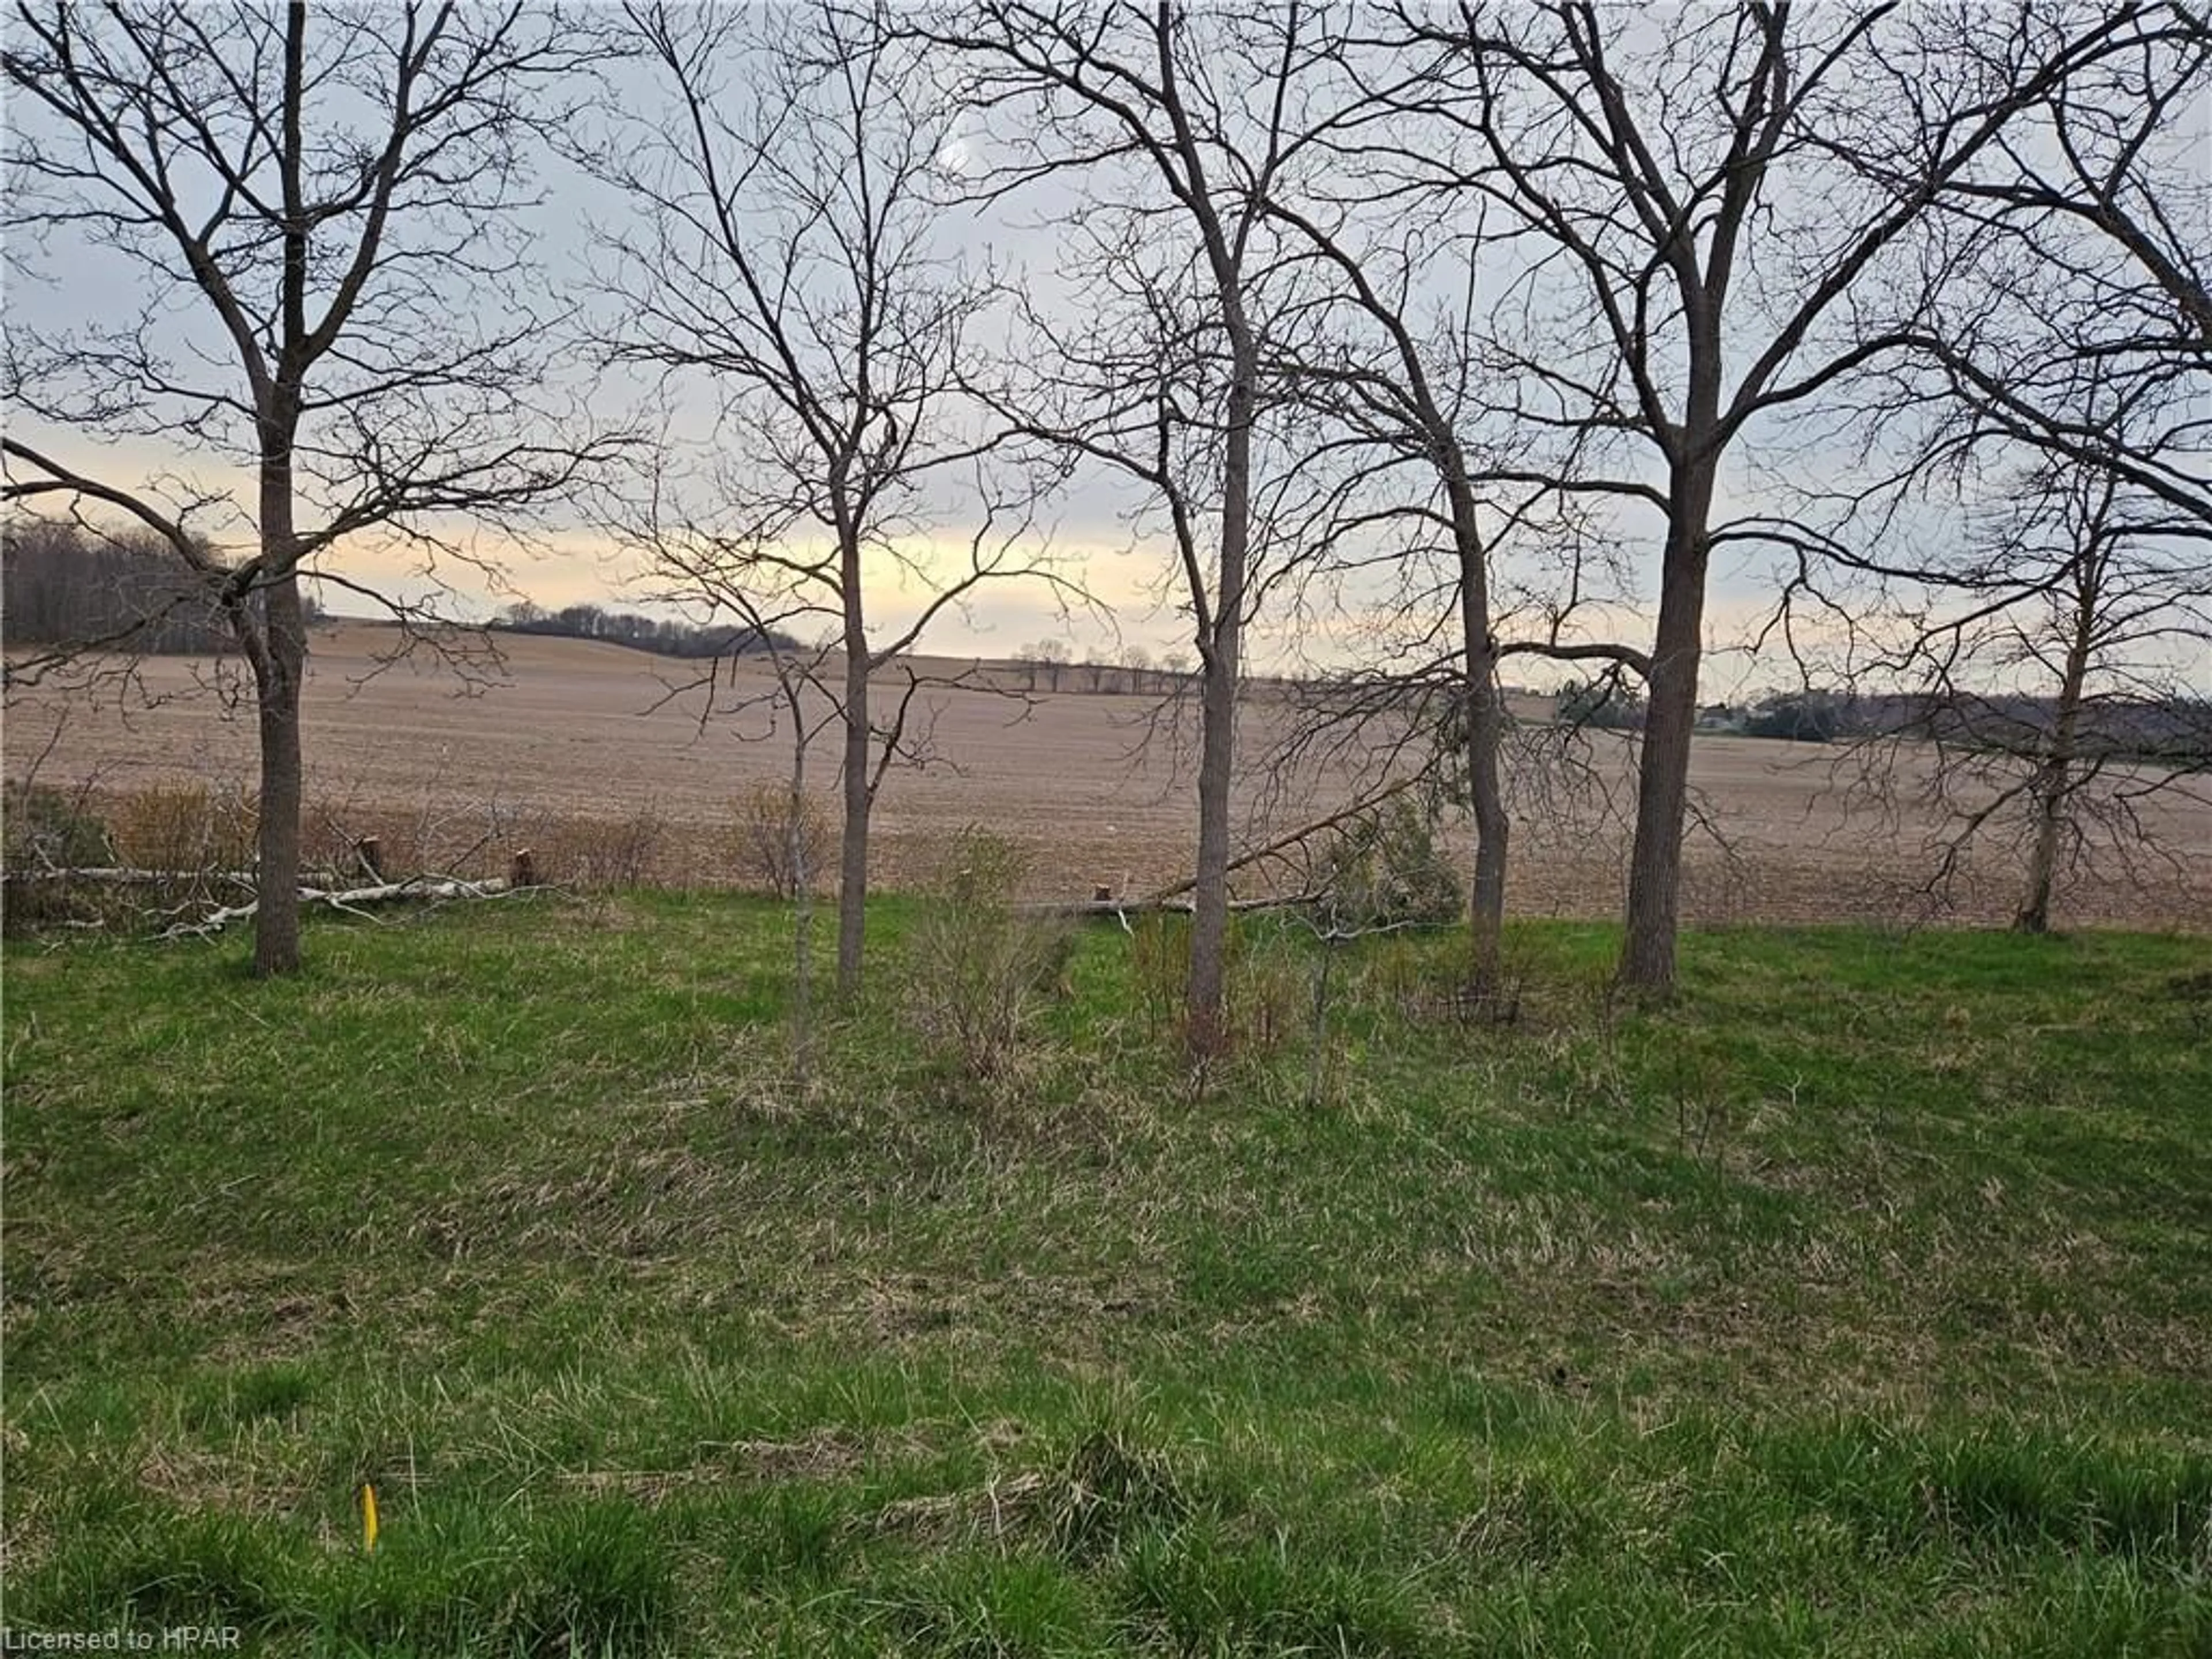 Fenced yard for LOT 4 Parr Line Line, Holmesville Ontario N0M 1L0